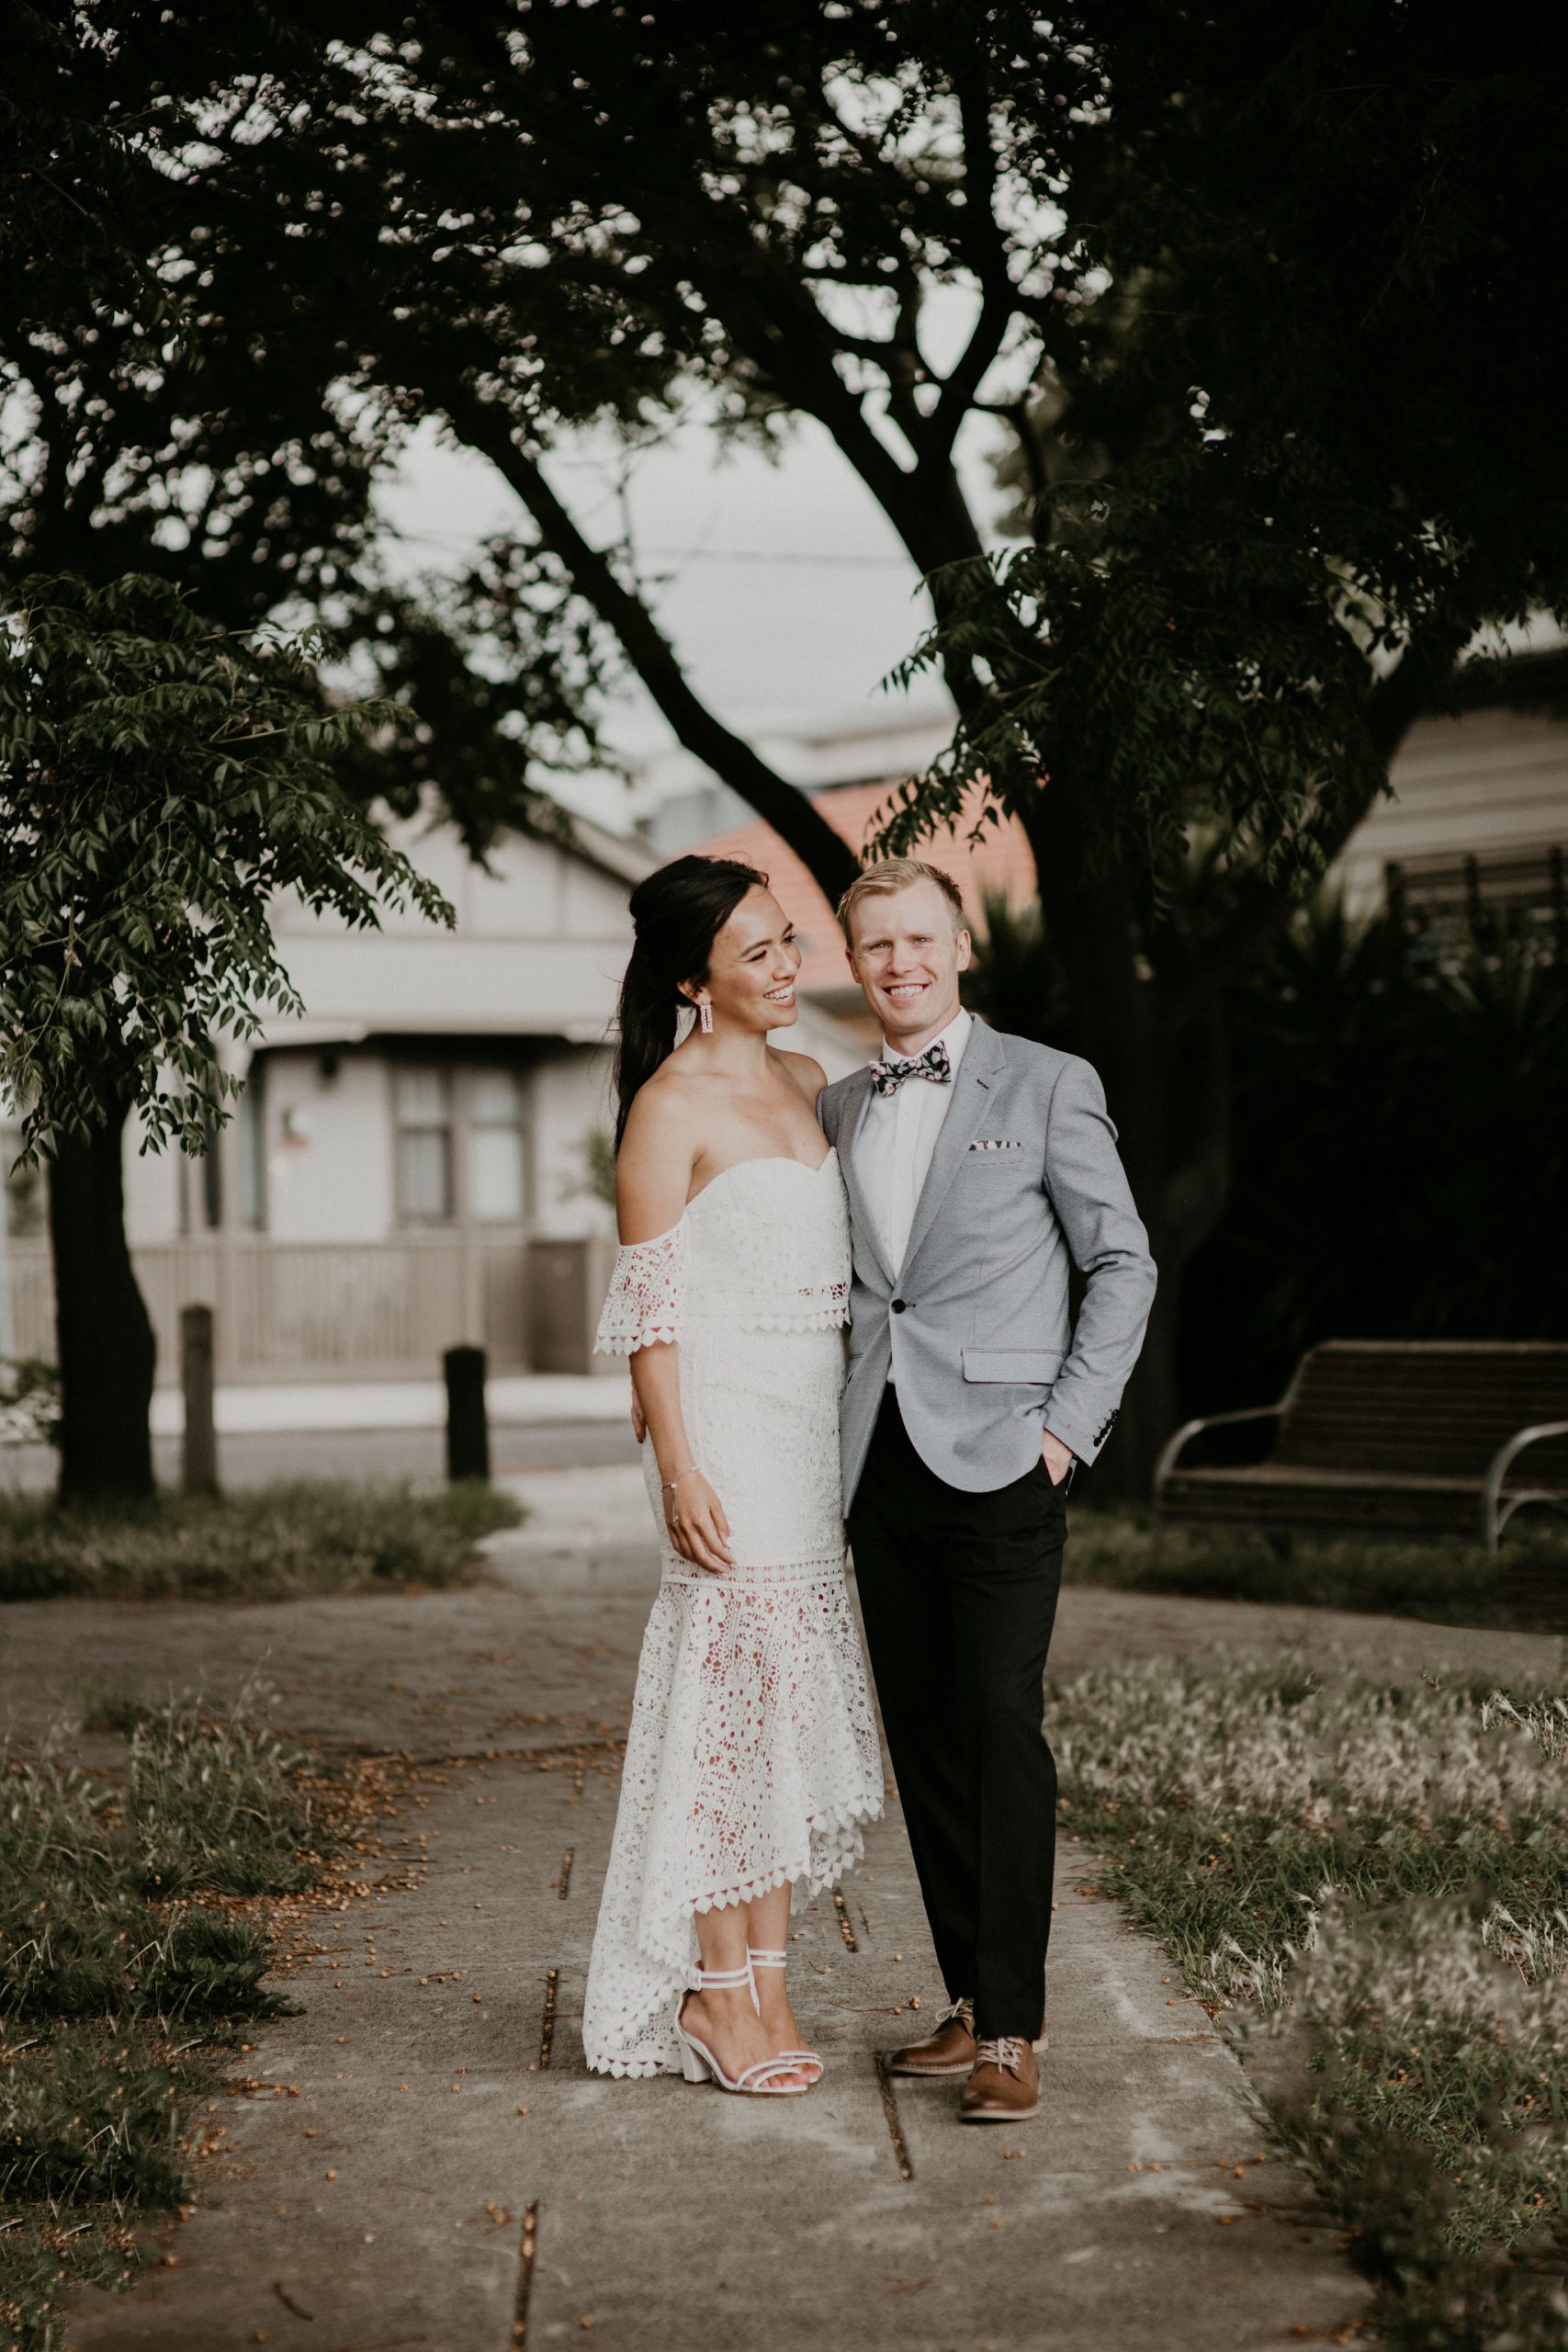 Lets-Elope-Melbourne-Celebrant-Photographer-Elopement-Package-Victoria-Sarah-Matler-Photography-Elope-at-Home-Footscray-weddings-intimate-22